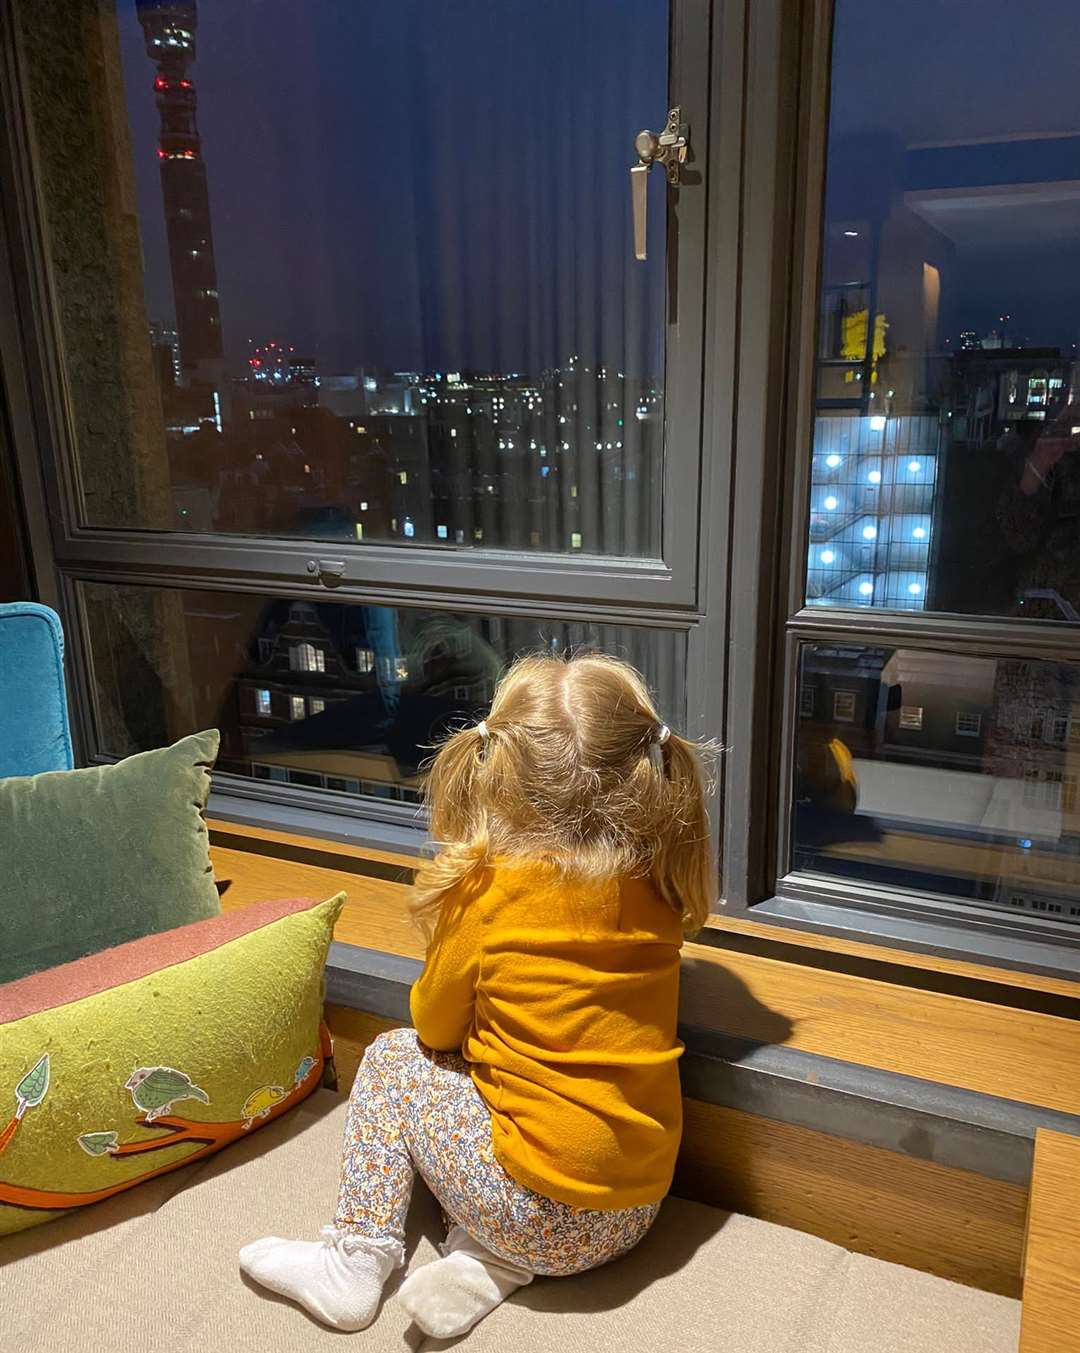 Taking in the view from the cushioned window seats in our room at The Treehouse